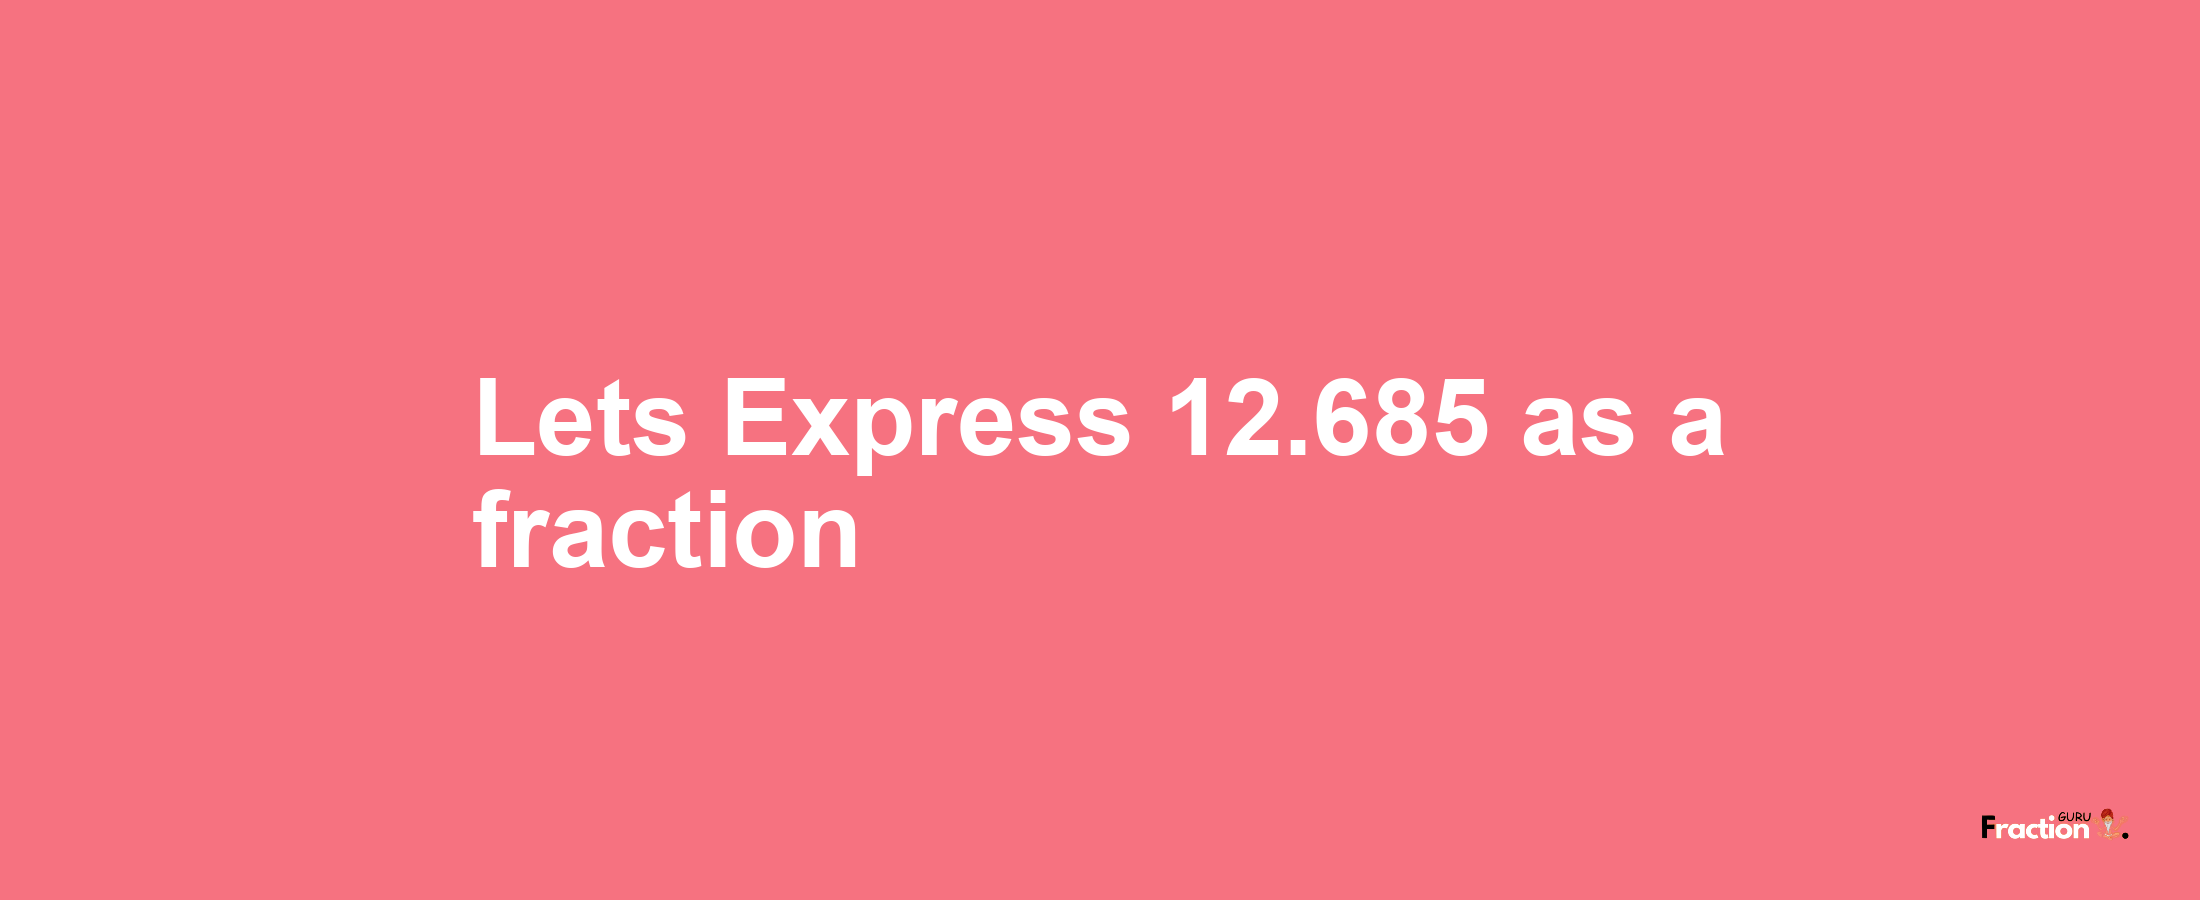 Lets Express 12.685 as afraction